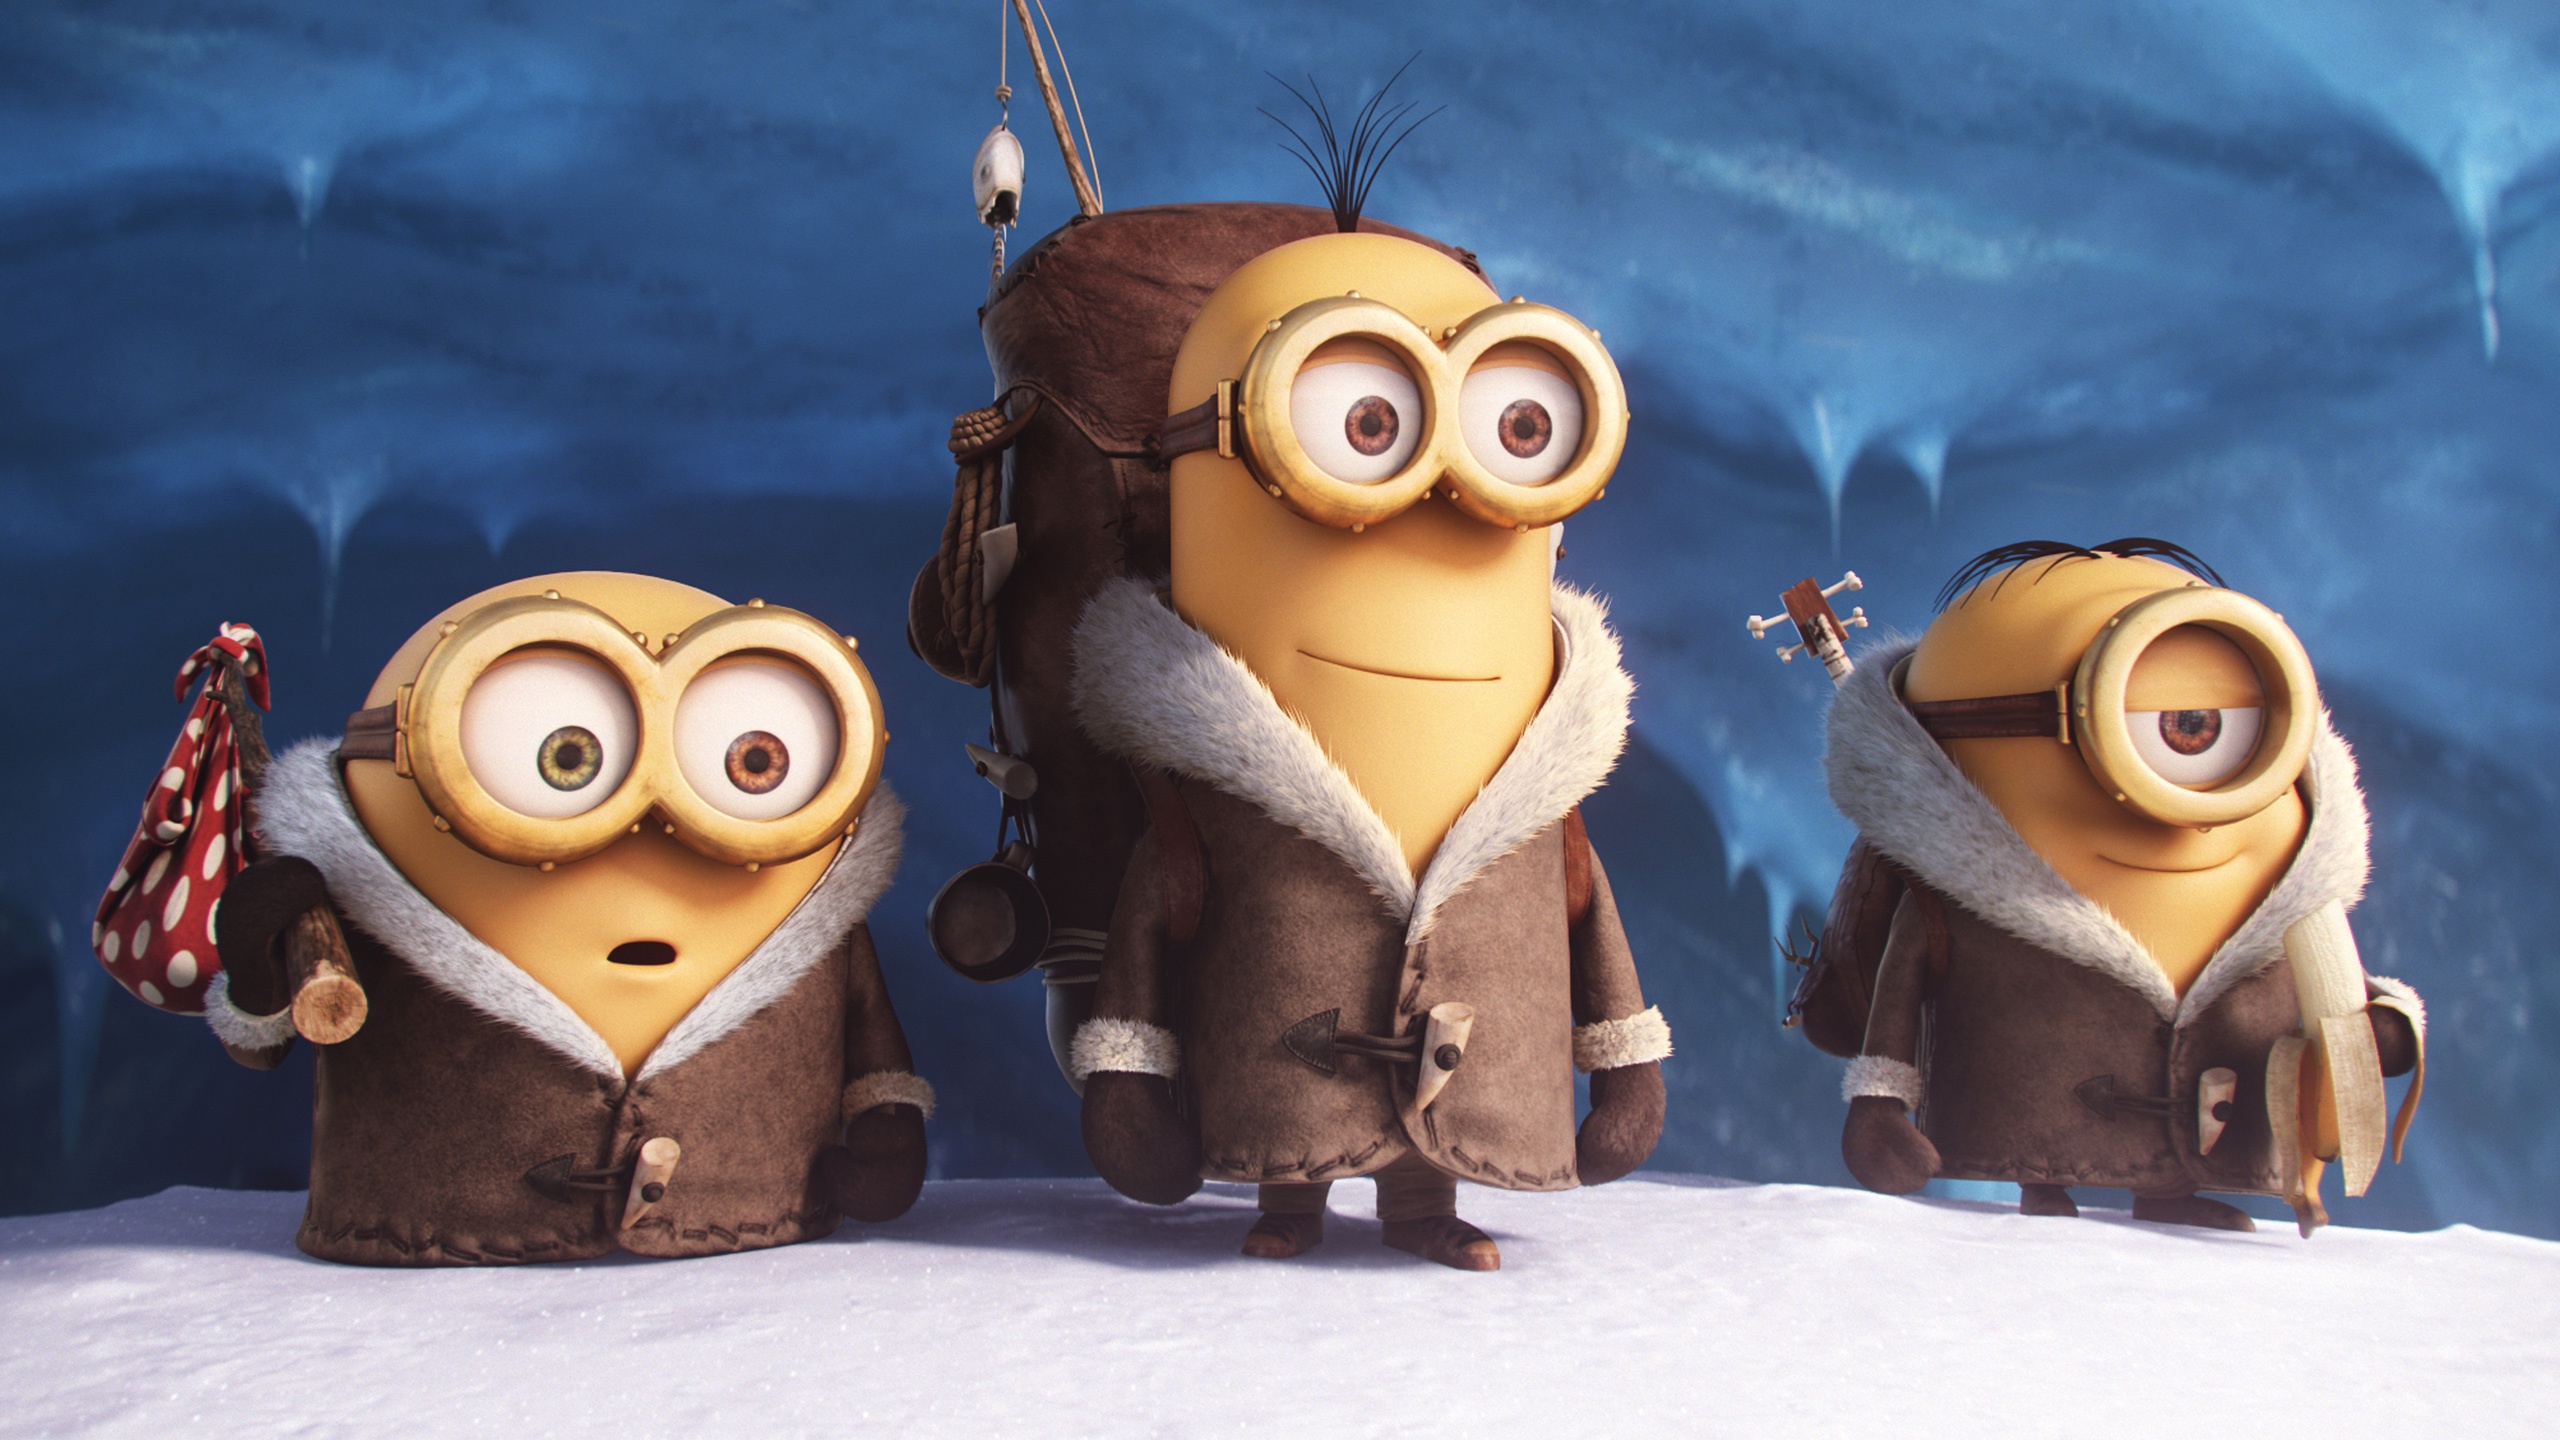 50+ Minions HD Wallpapers and Backgrounds